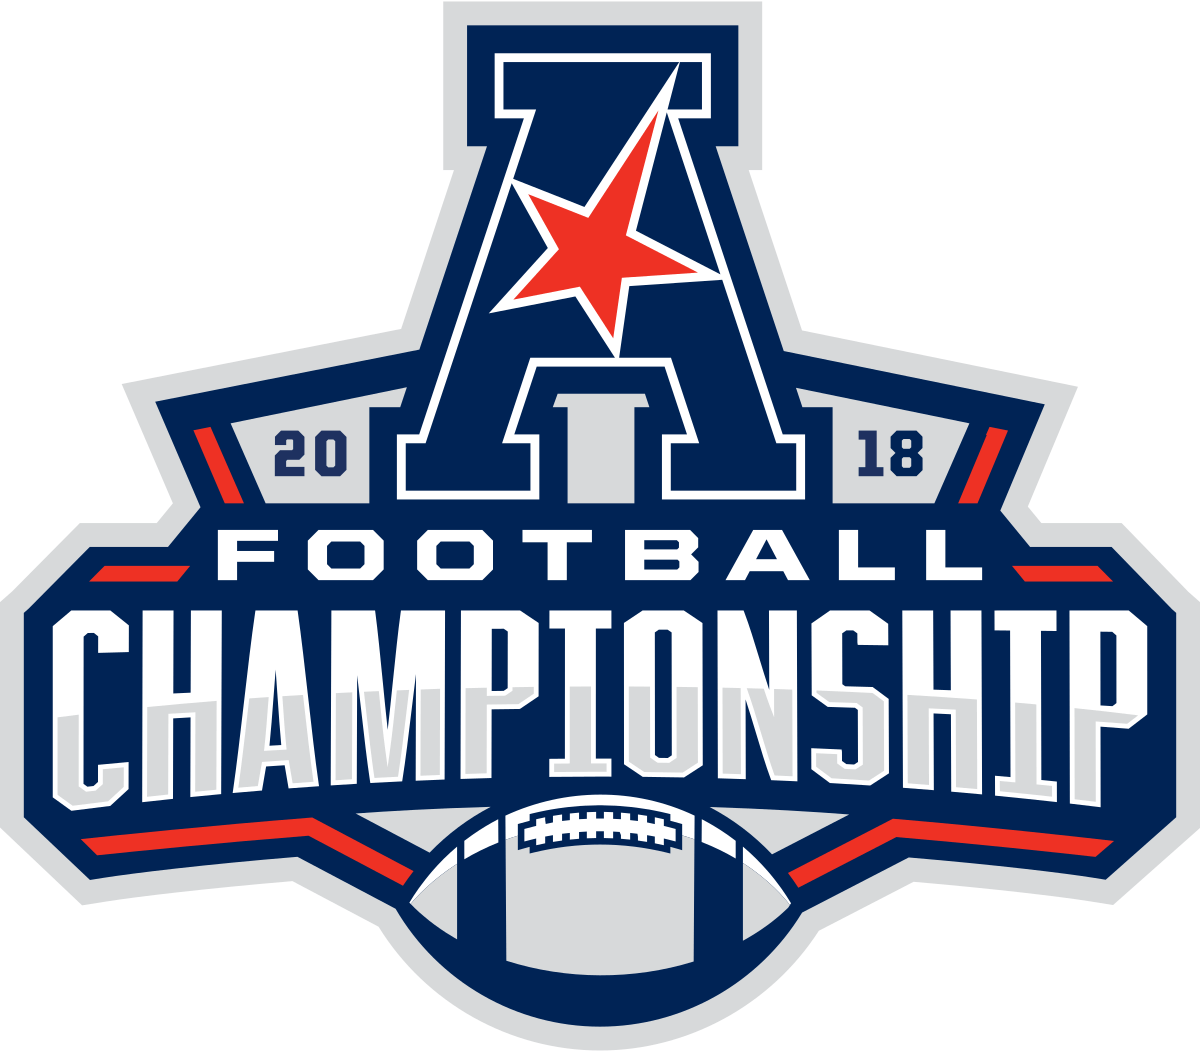 Championship Logo - 2018 American Athletic Conference Football Championship Game